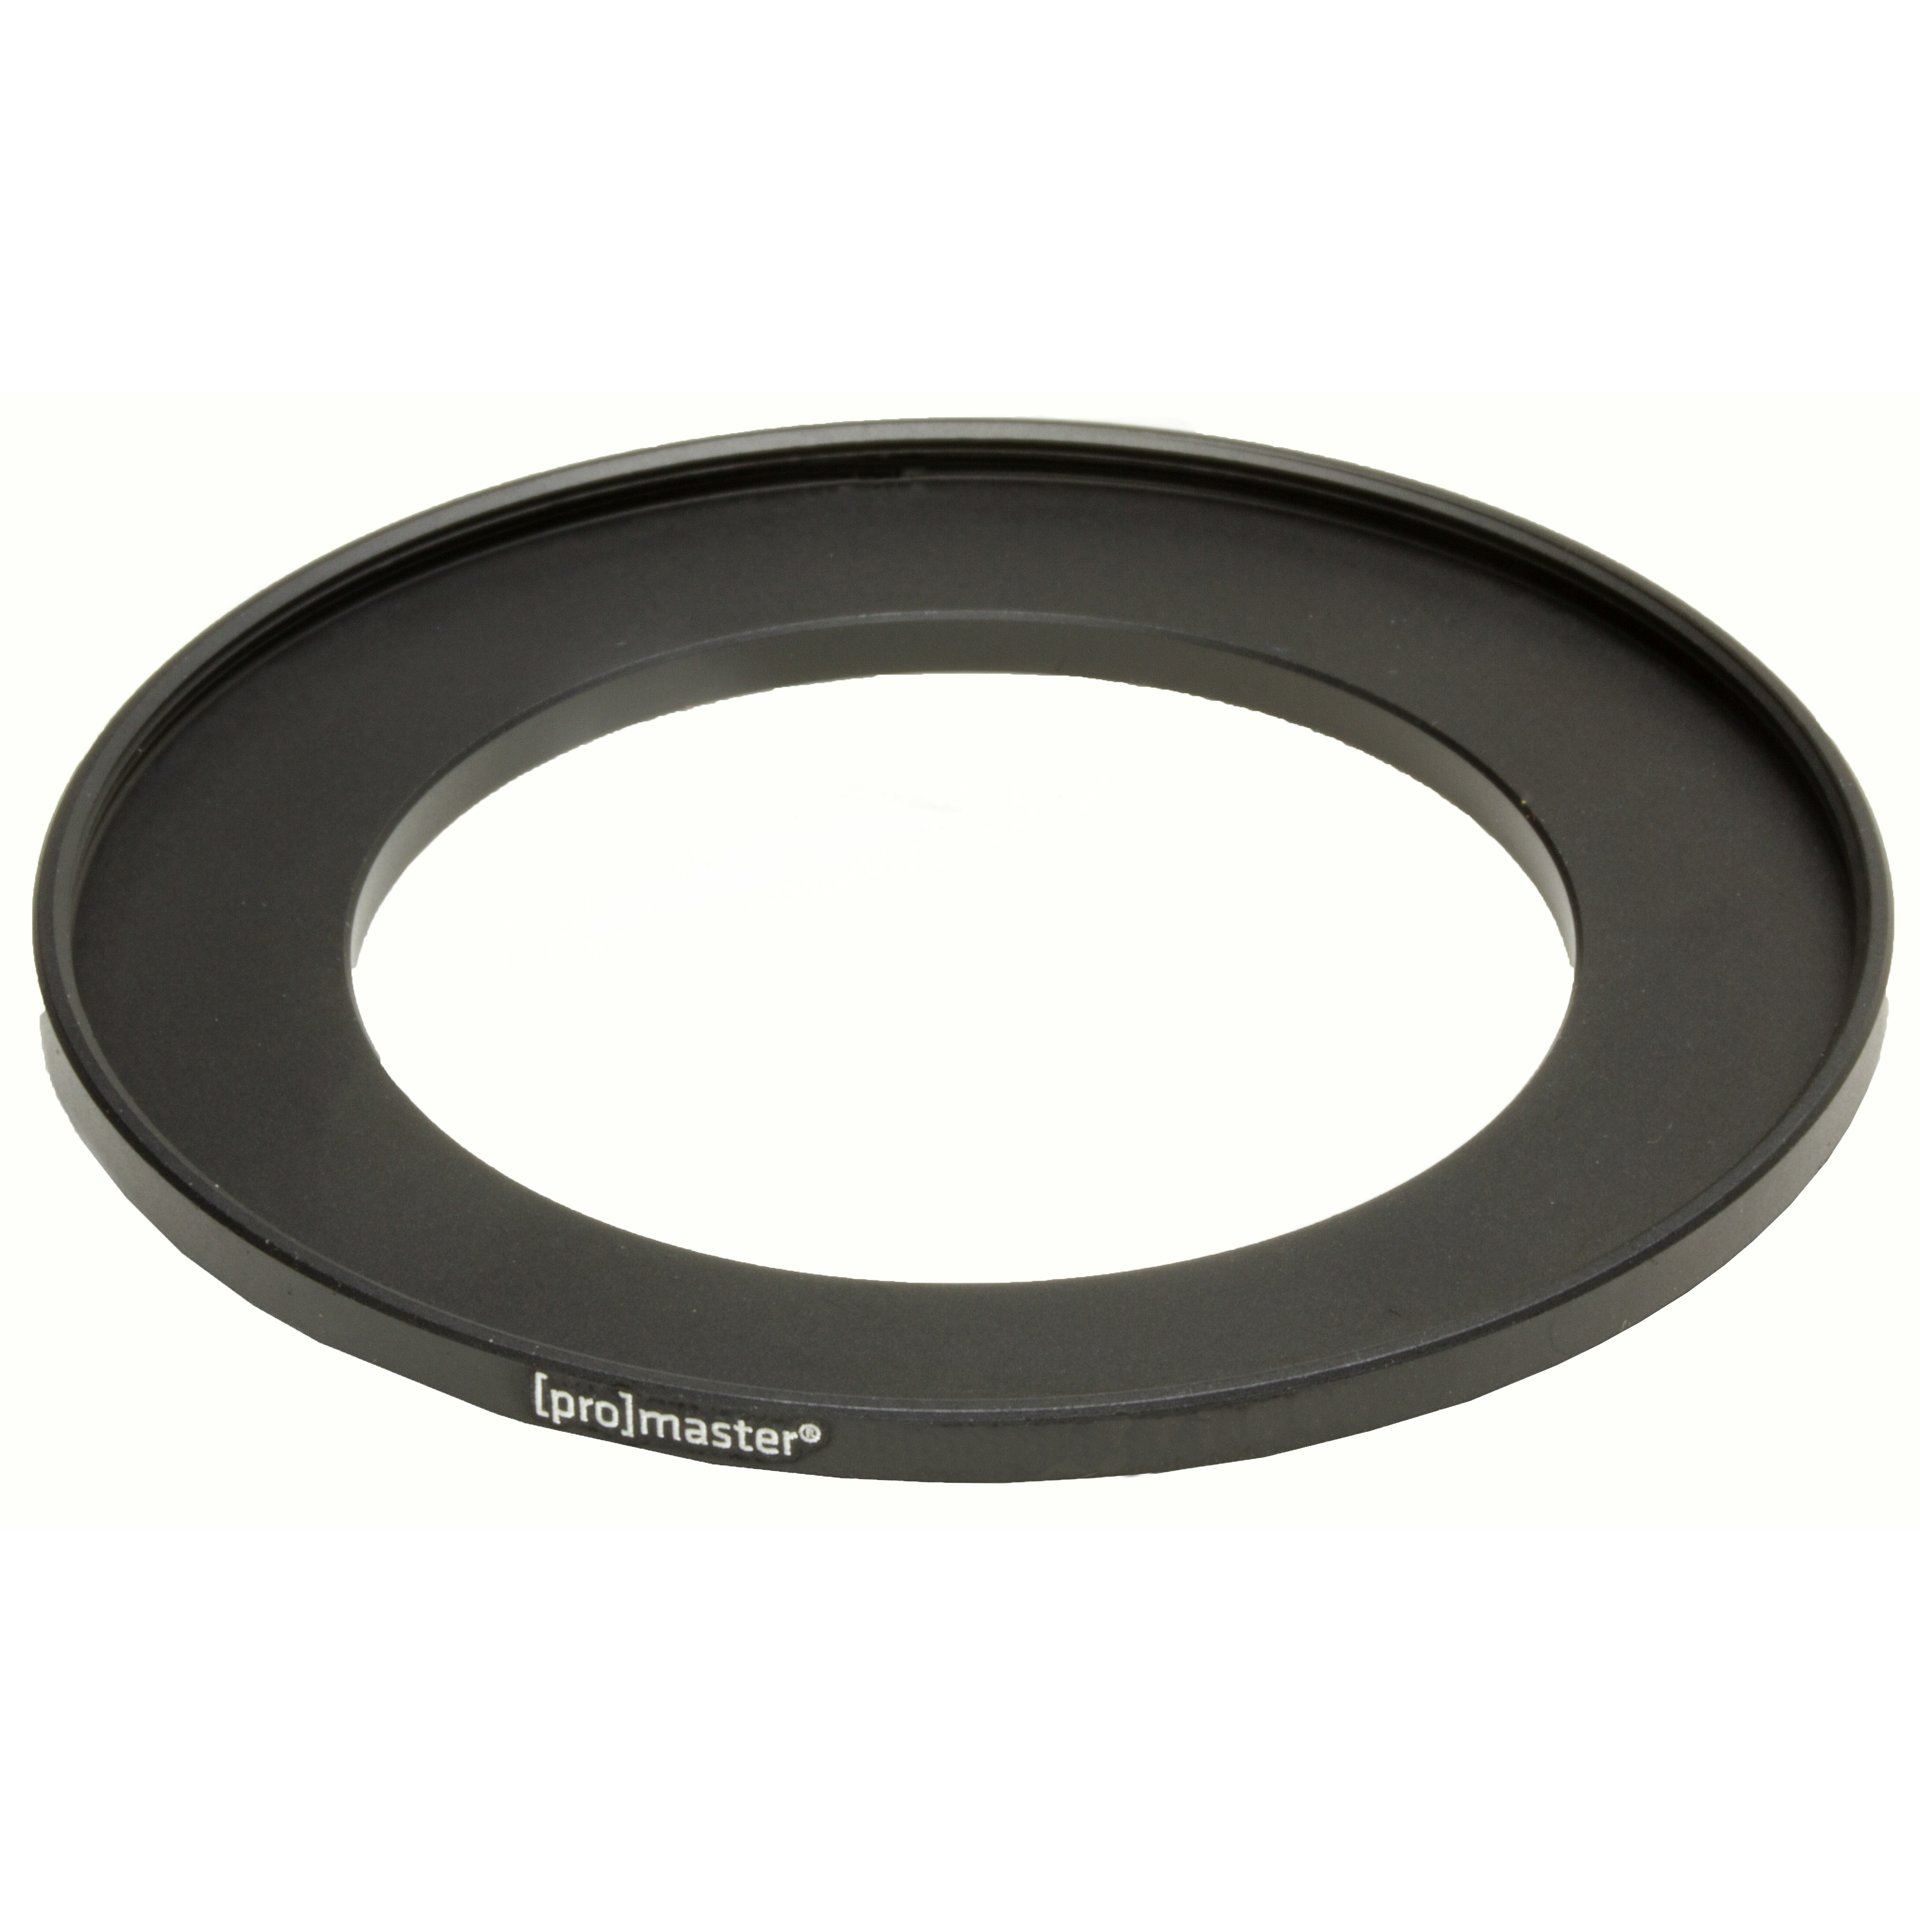 Promaster 4963 49-55mm Step-Up Ring